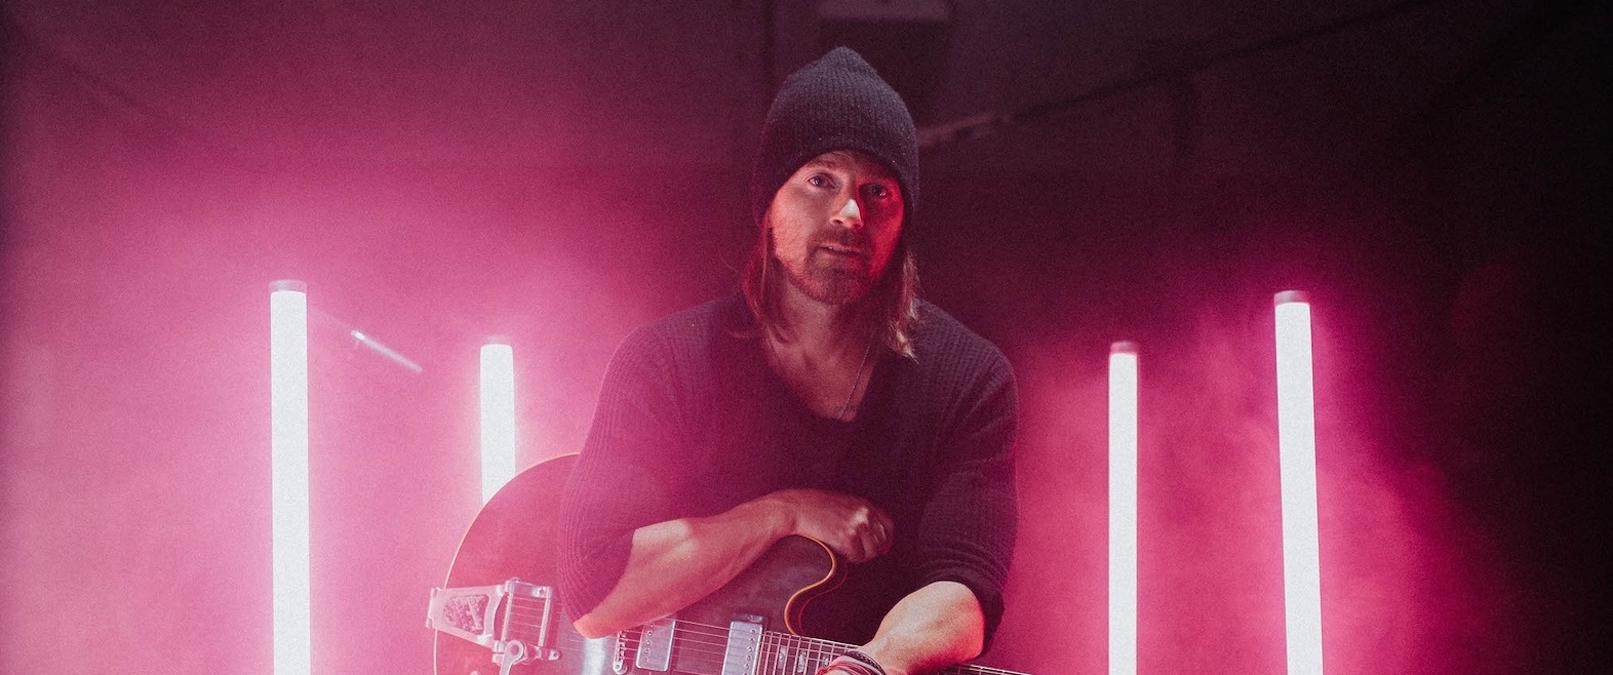 HOT TRACK: “Crazy One More Time” (Revisited) by Kip Moore